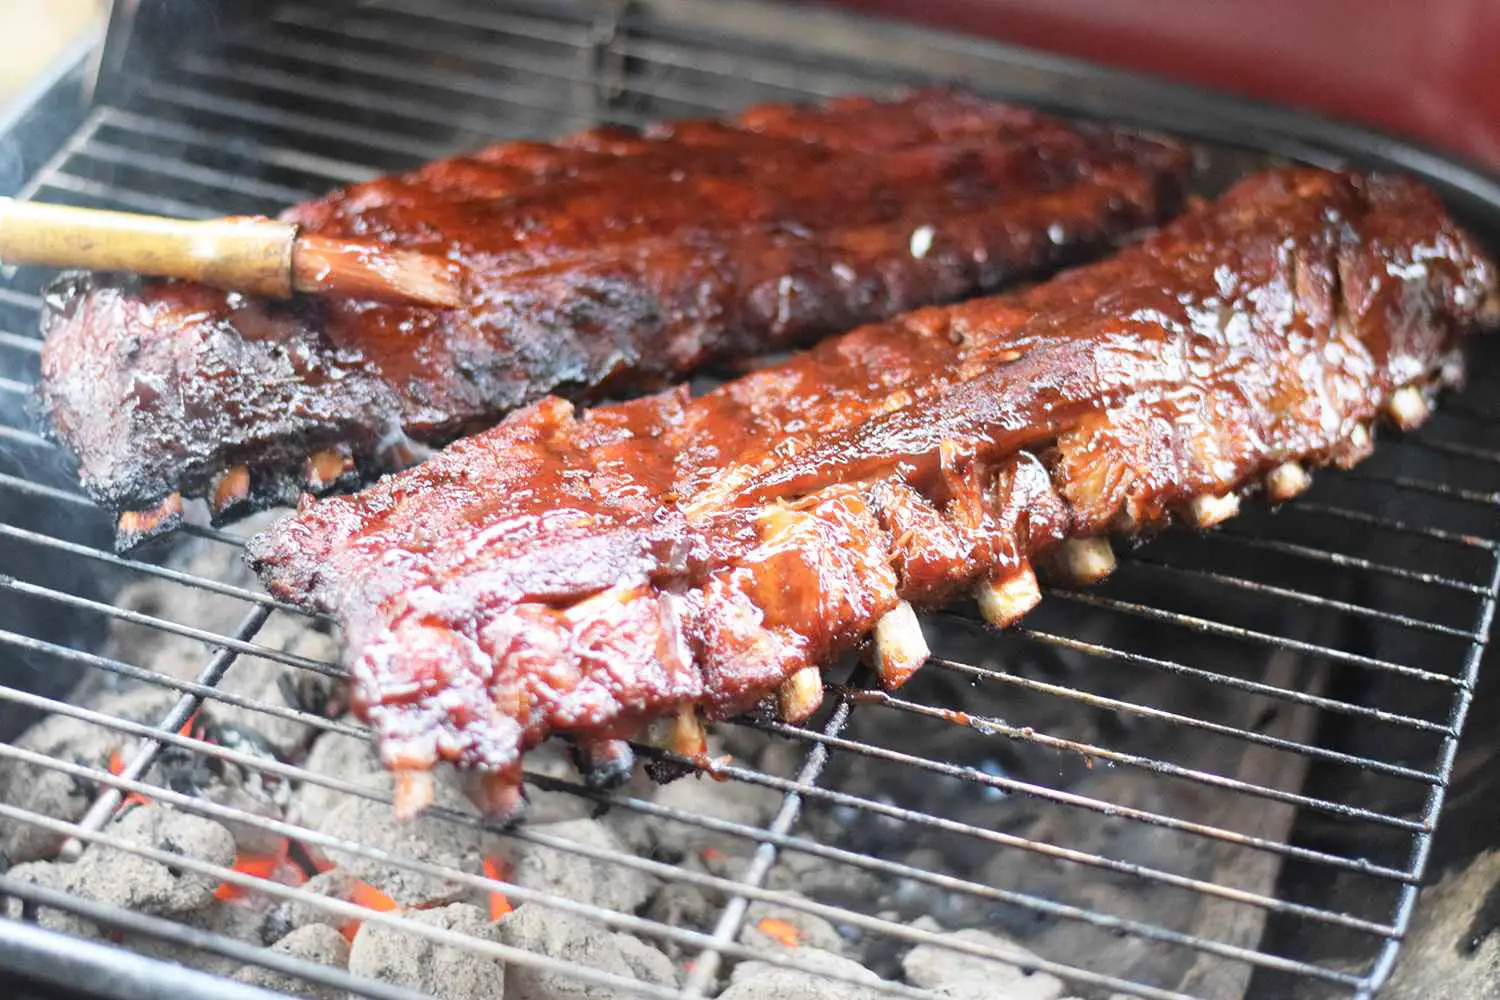 How to Make Barbecue Ribs on a Charcoal Grill